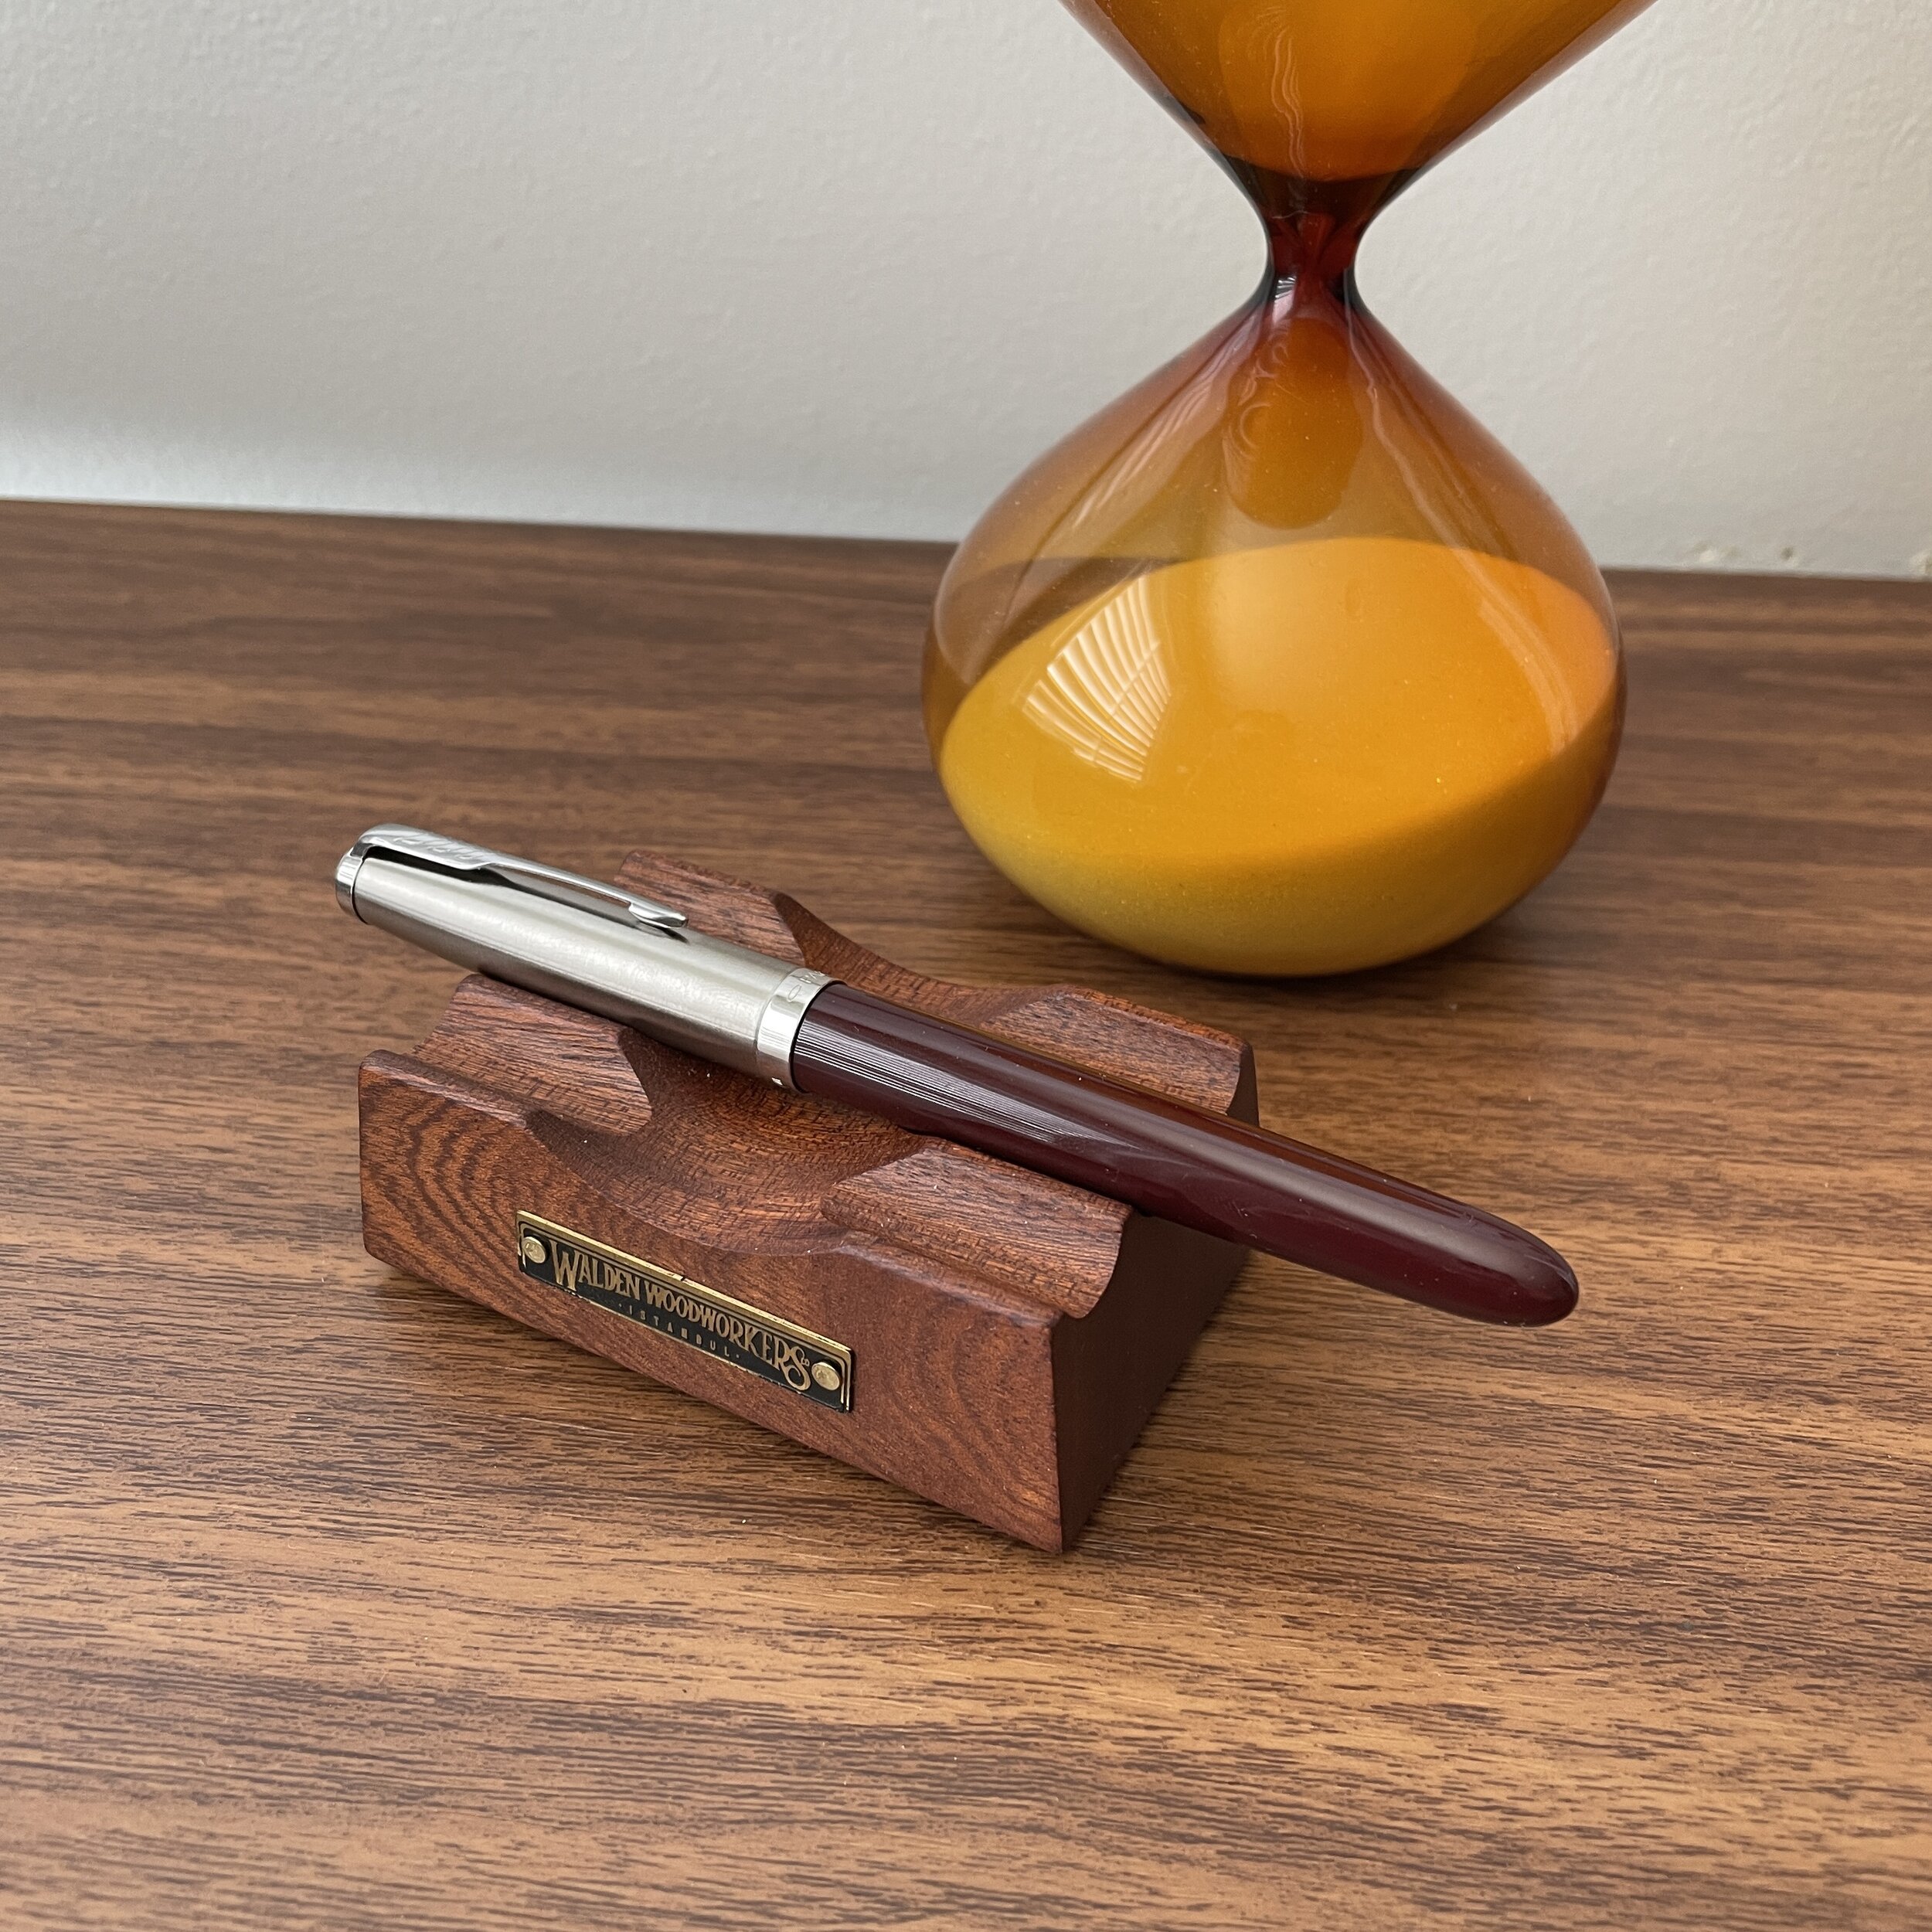 First Impressions: Hands On with the New Parker 51 Fountain Pen